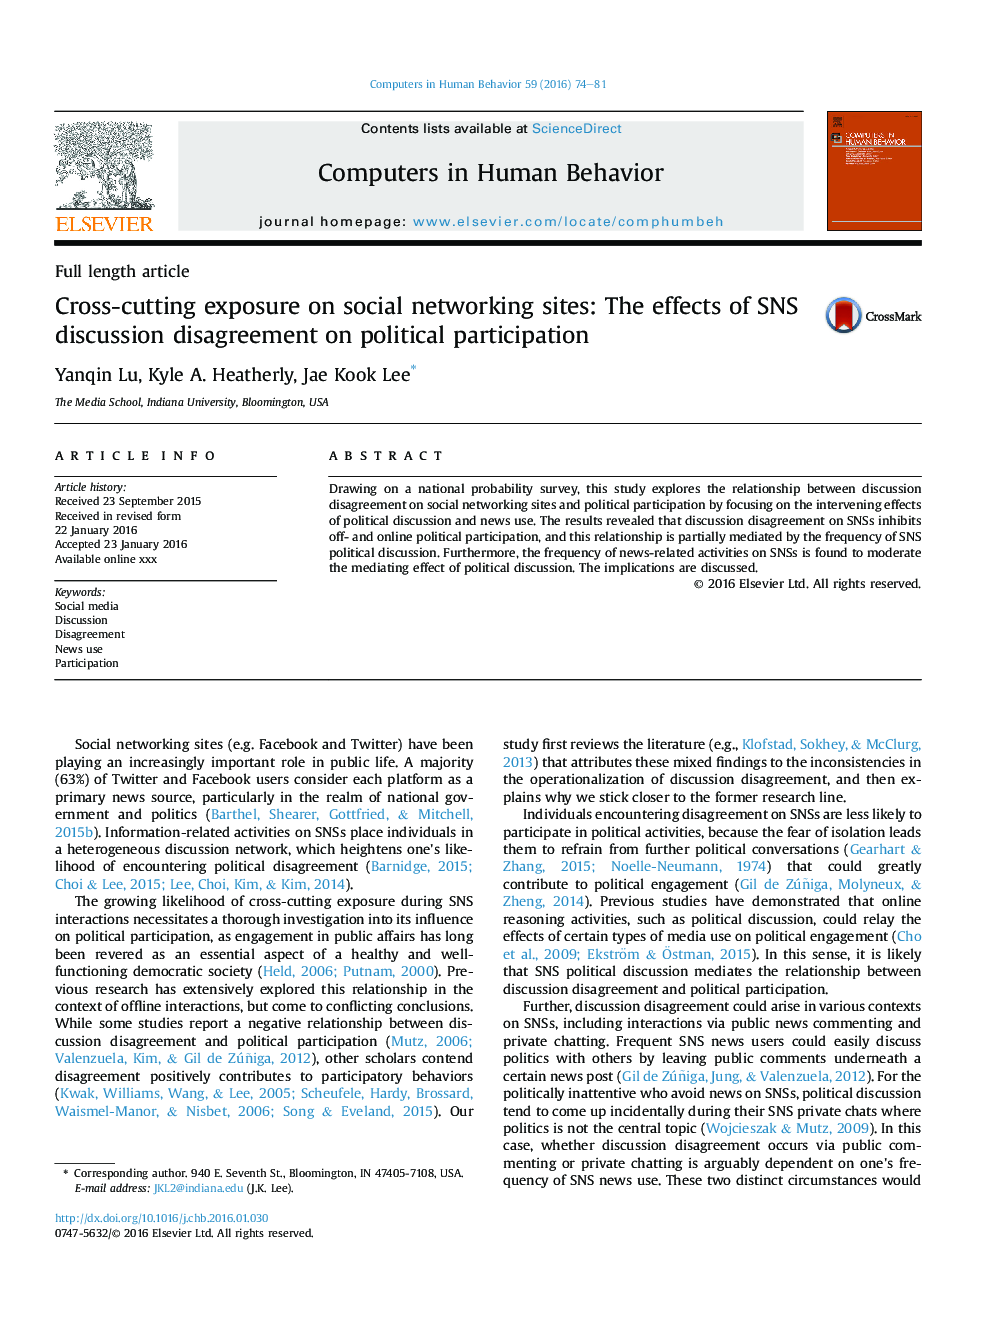 Cross-cutting exposure on social networking sites: The effects of SNS discussion disagreement on political participation